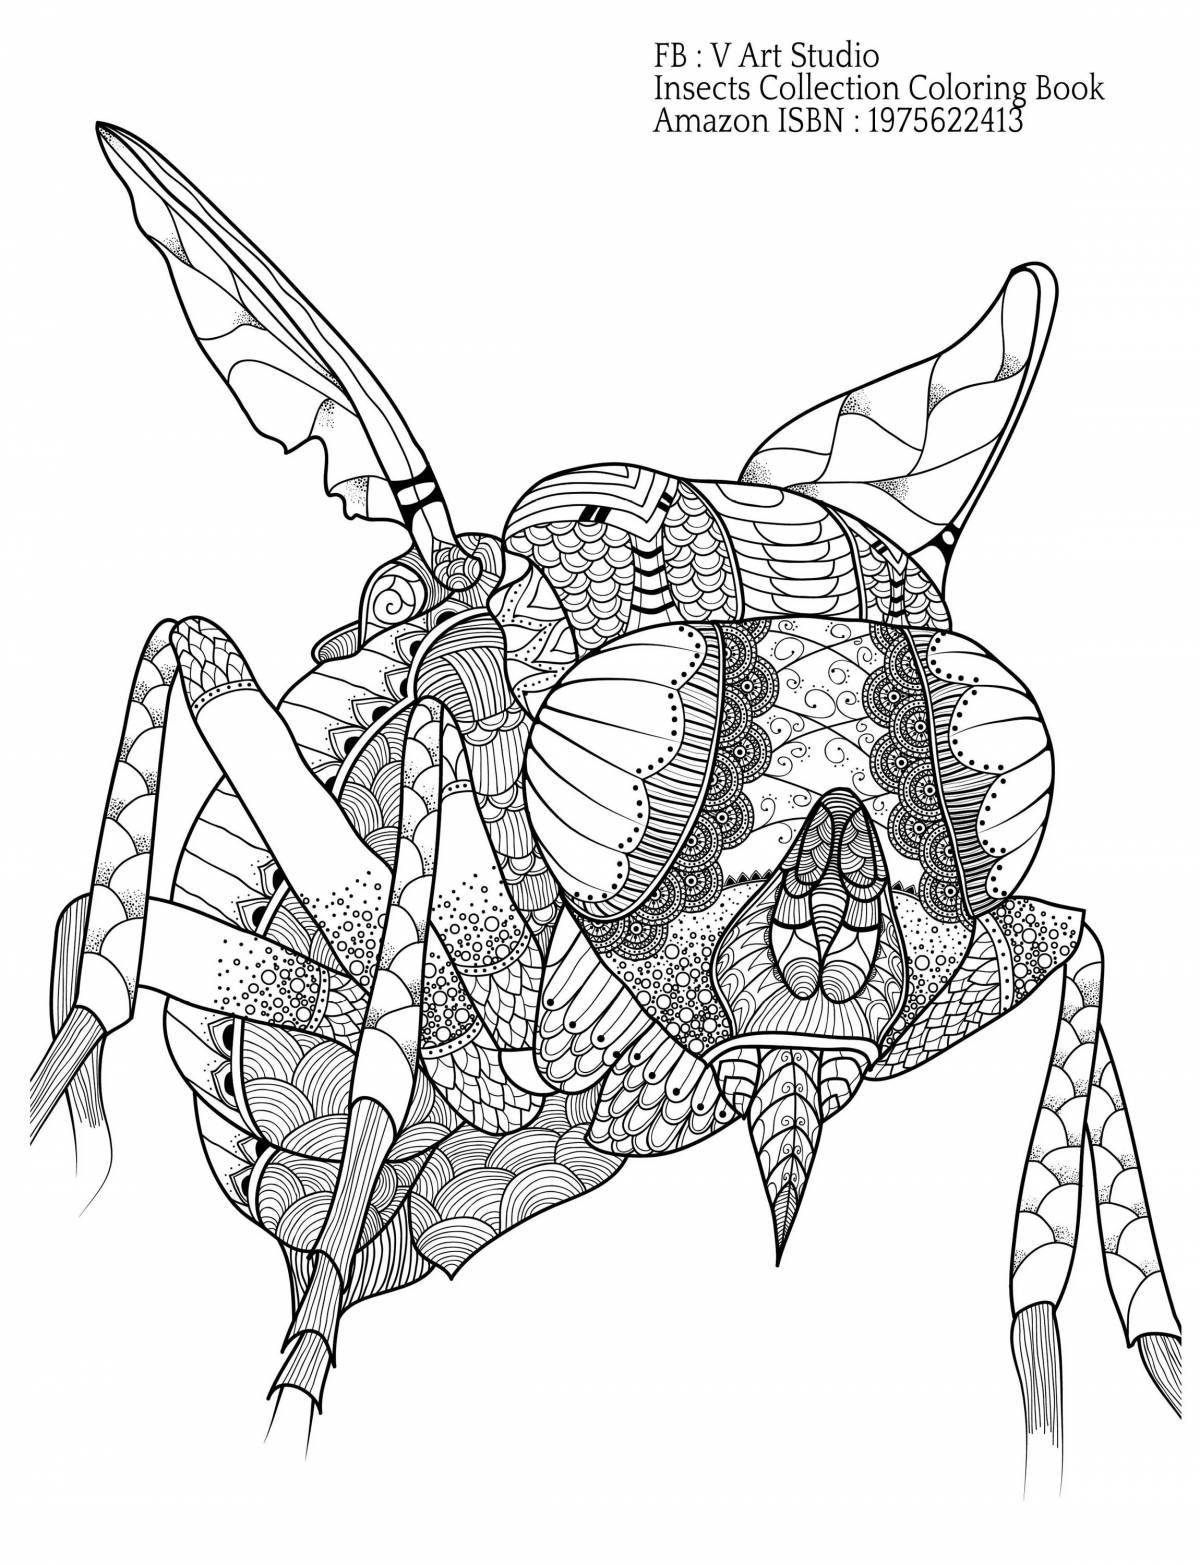 Relaxing anti-stress spider coloring book